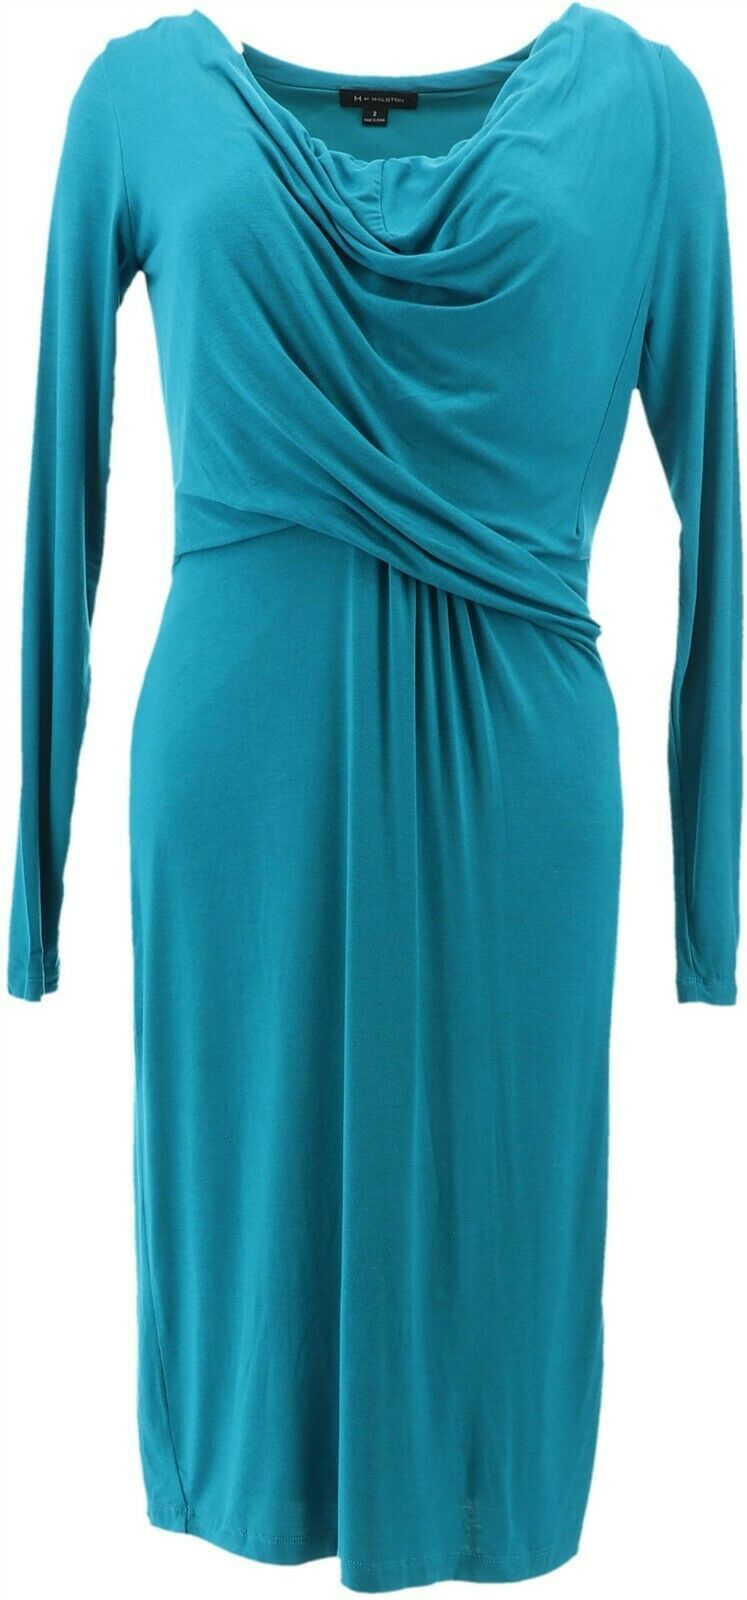 Halston Solid Cowl Neck Long Slv Dress Teal 2 NEW A270359